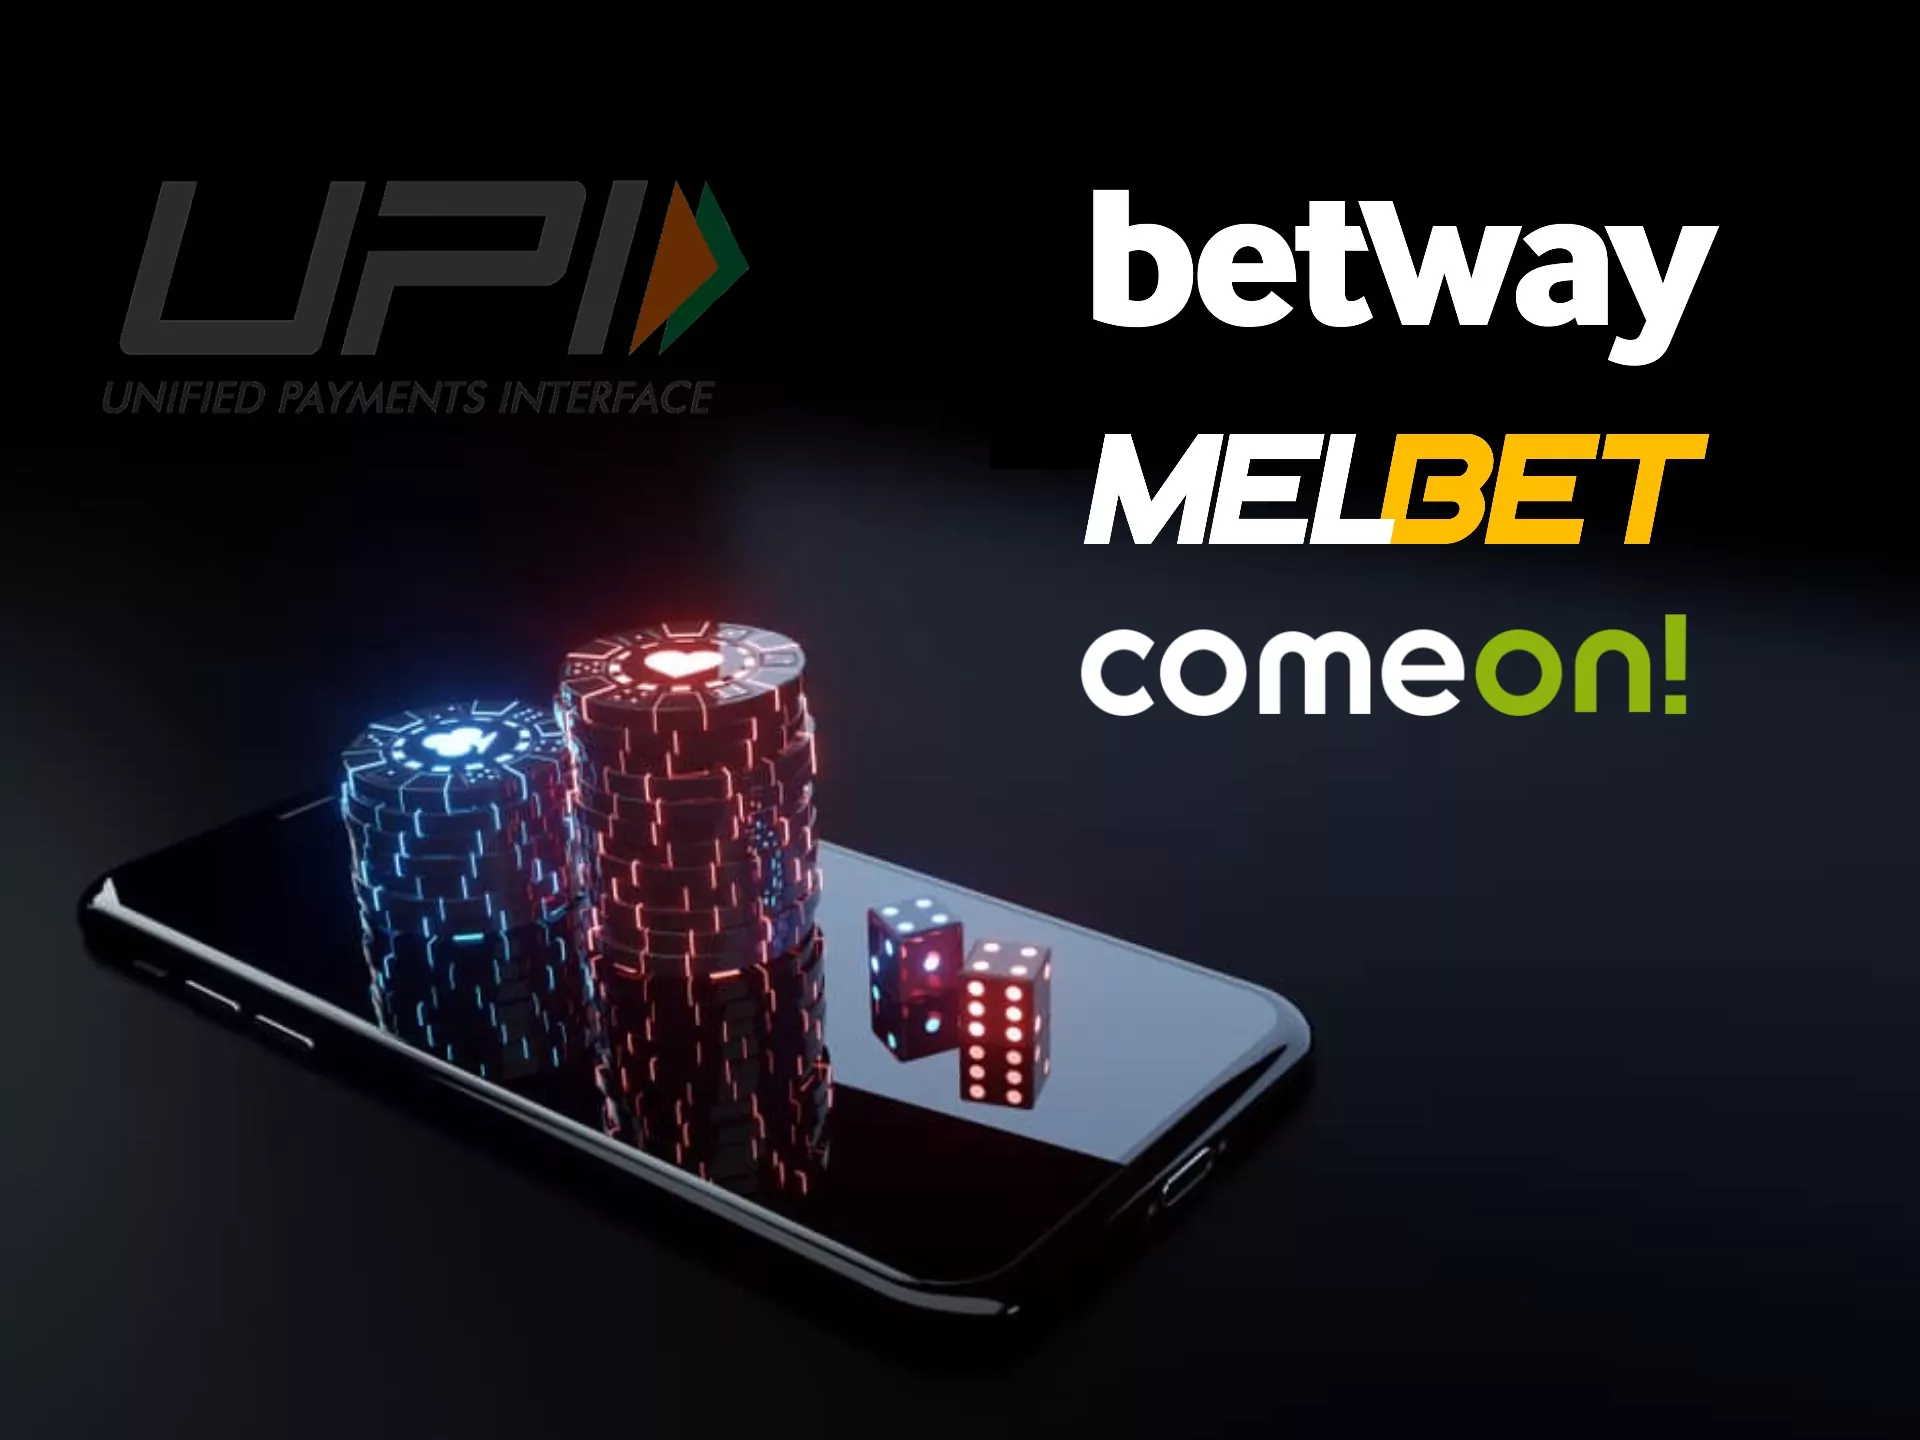 Sign up for Betway, Melbet and ComeOn and use UPI for depositing and withdrawing money.